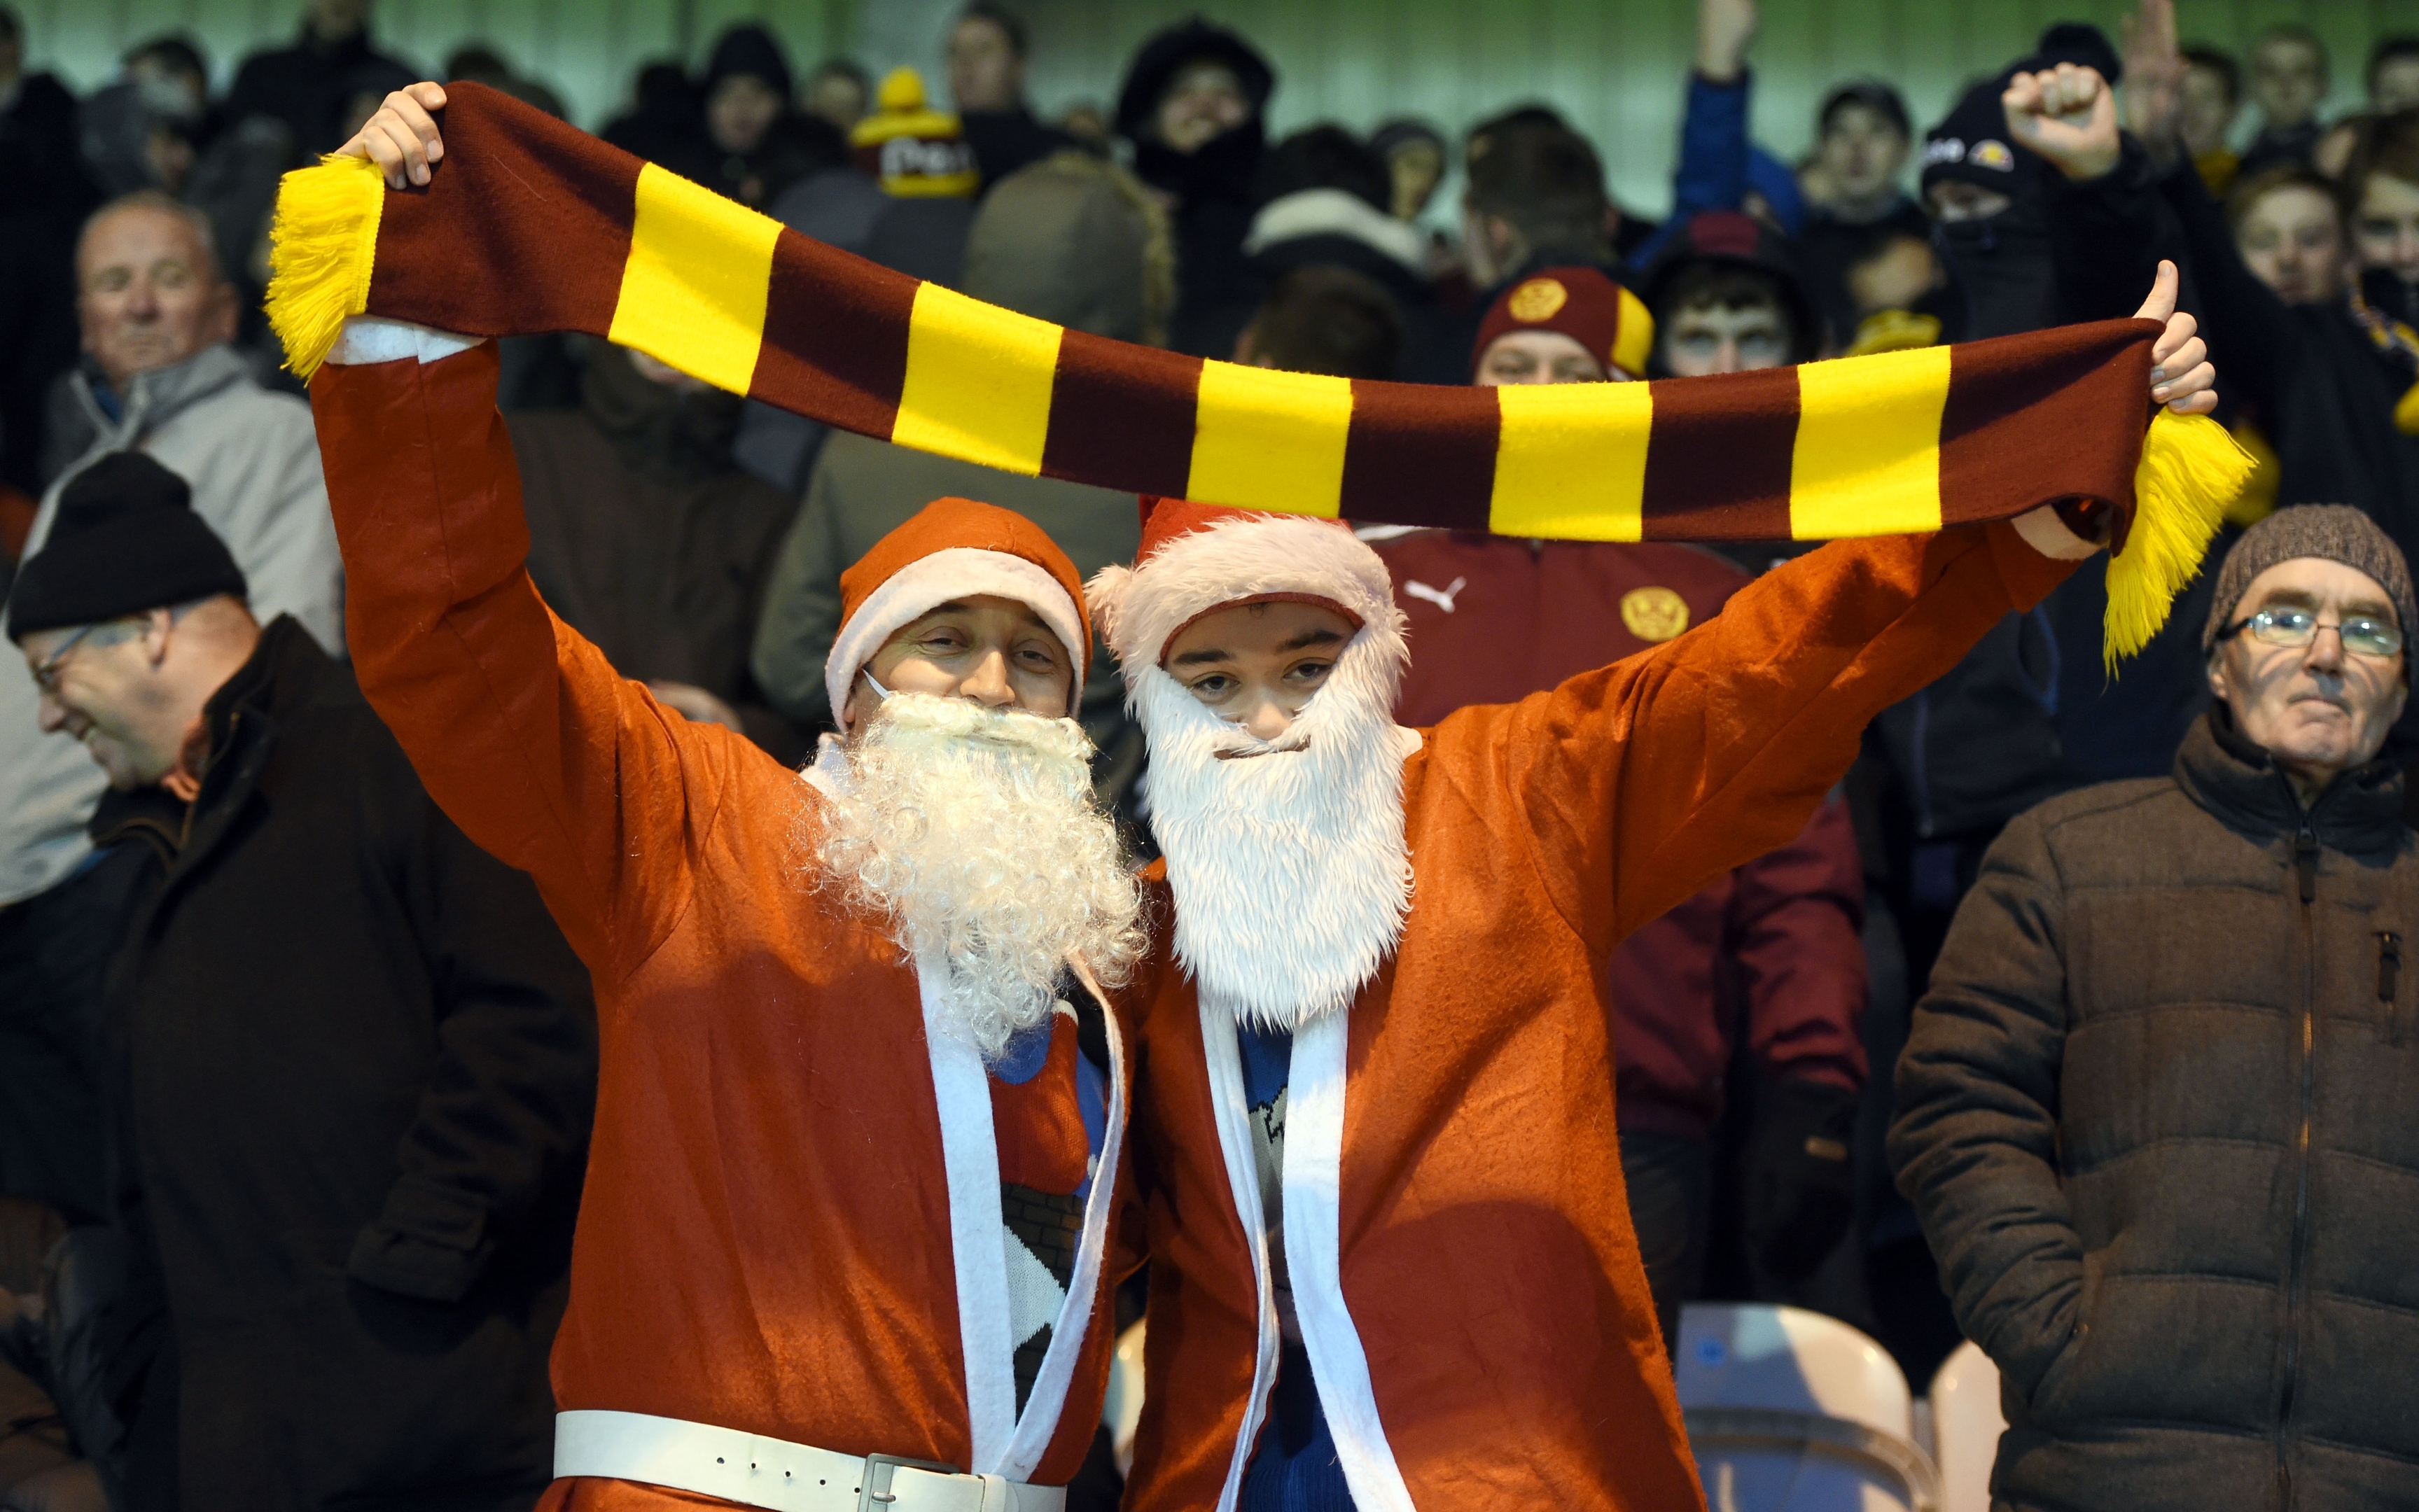 Motherwell fans got an early present in the shape of new manager Ian Baraclough